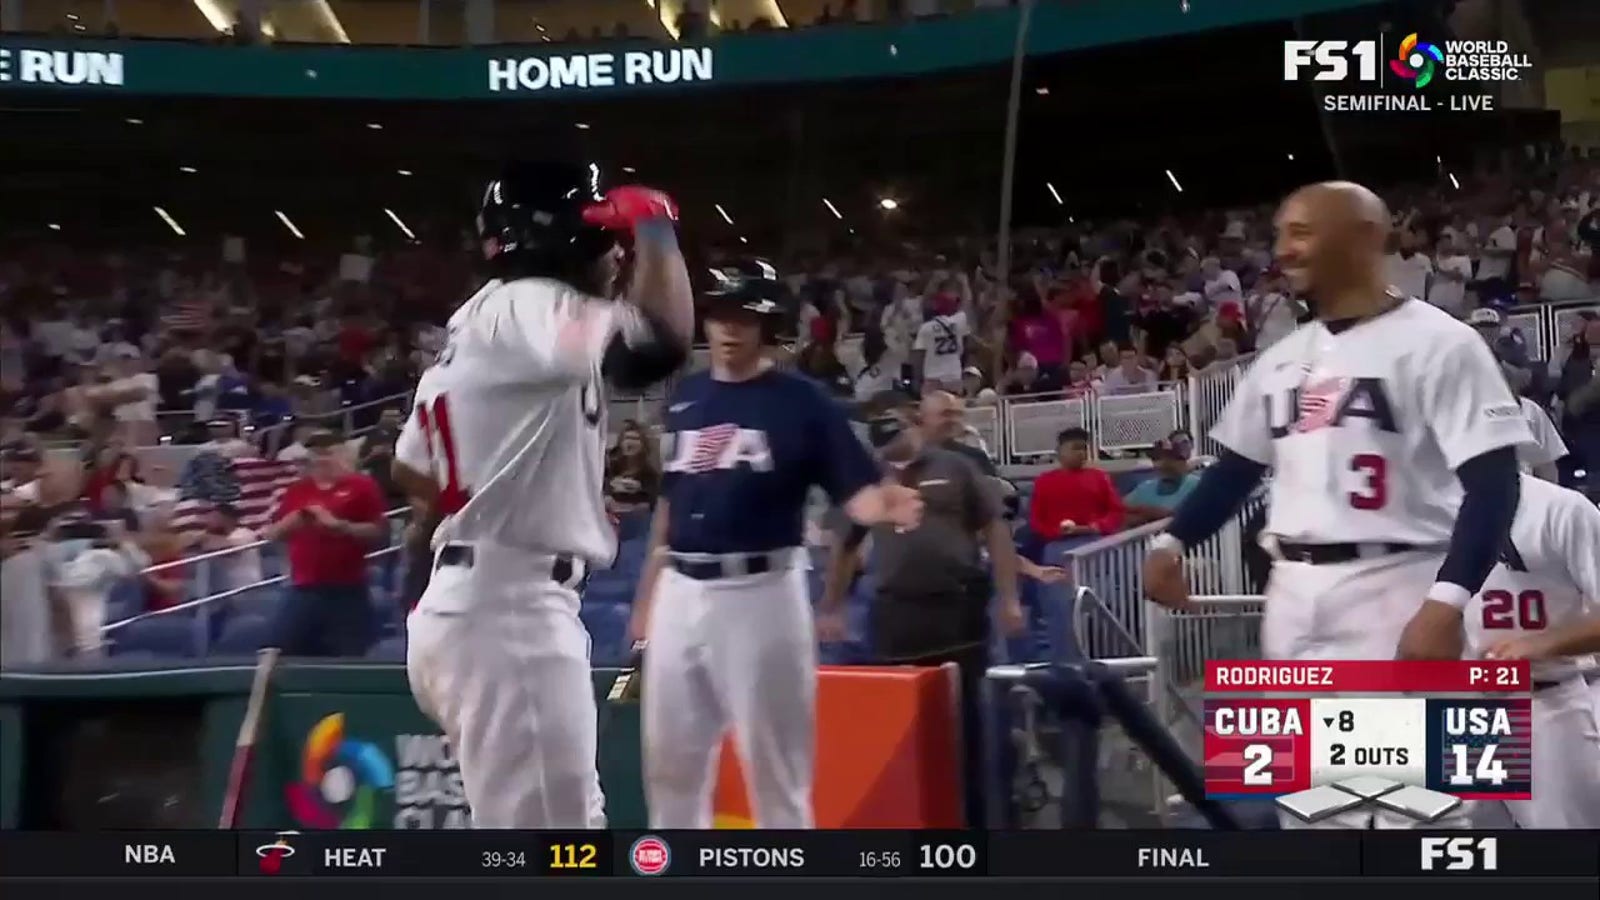 Cedric Mullins crushes a solo home run to give Team USA a 14-2 lead over Cuba